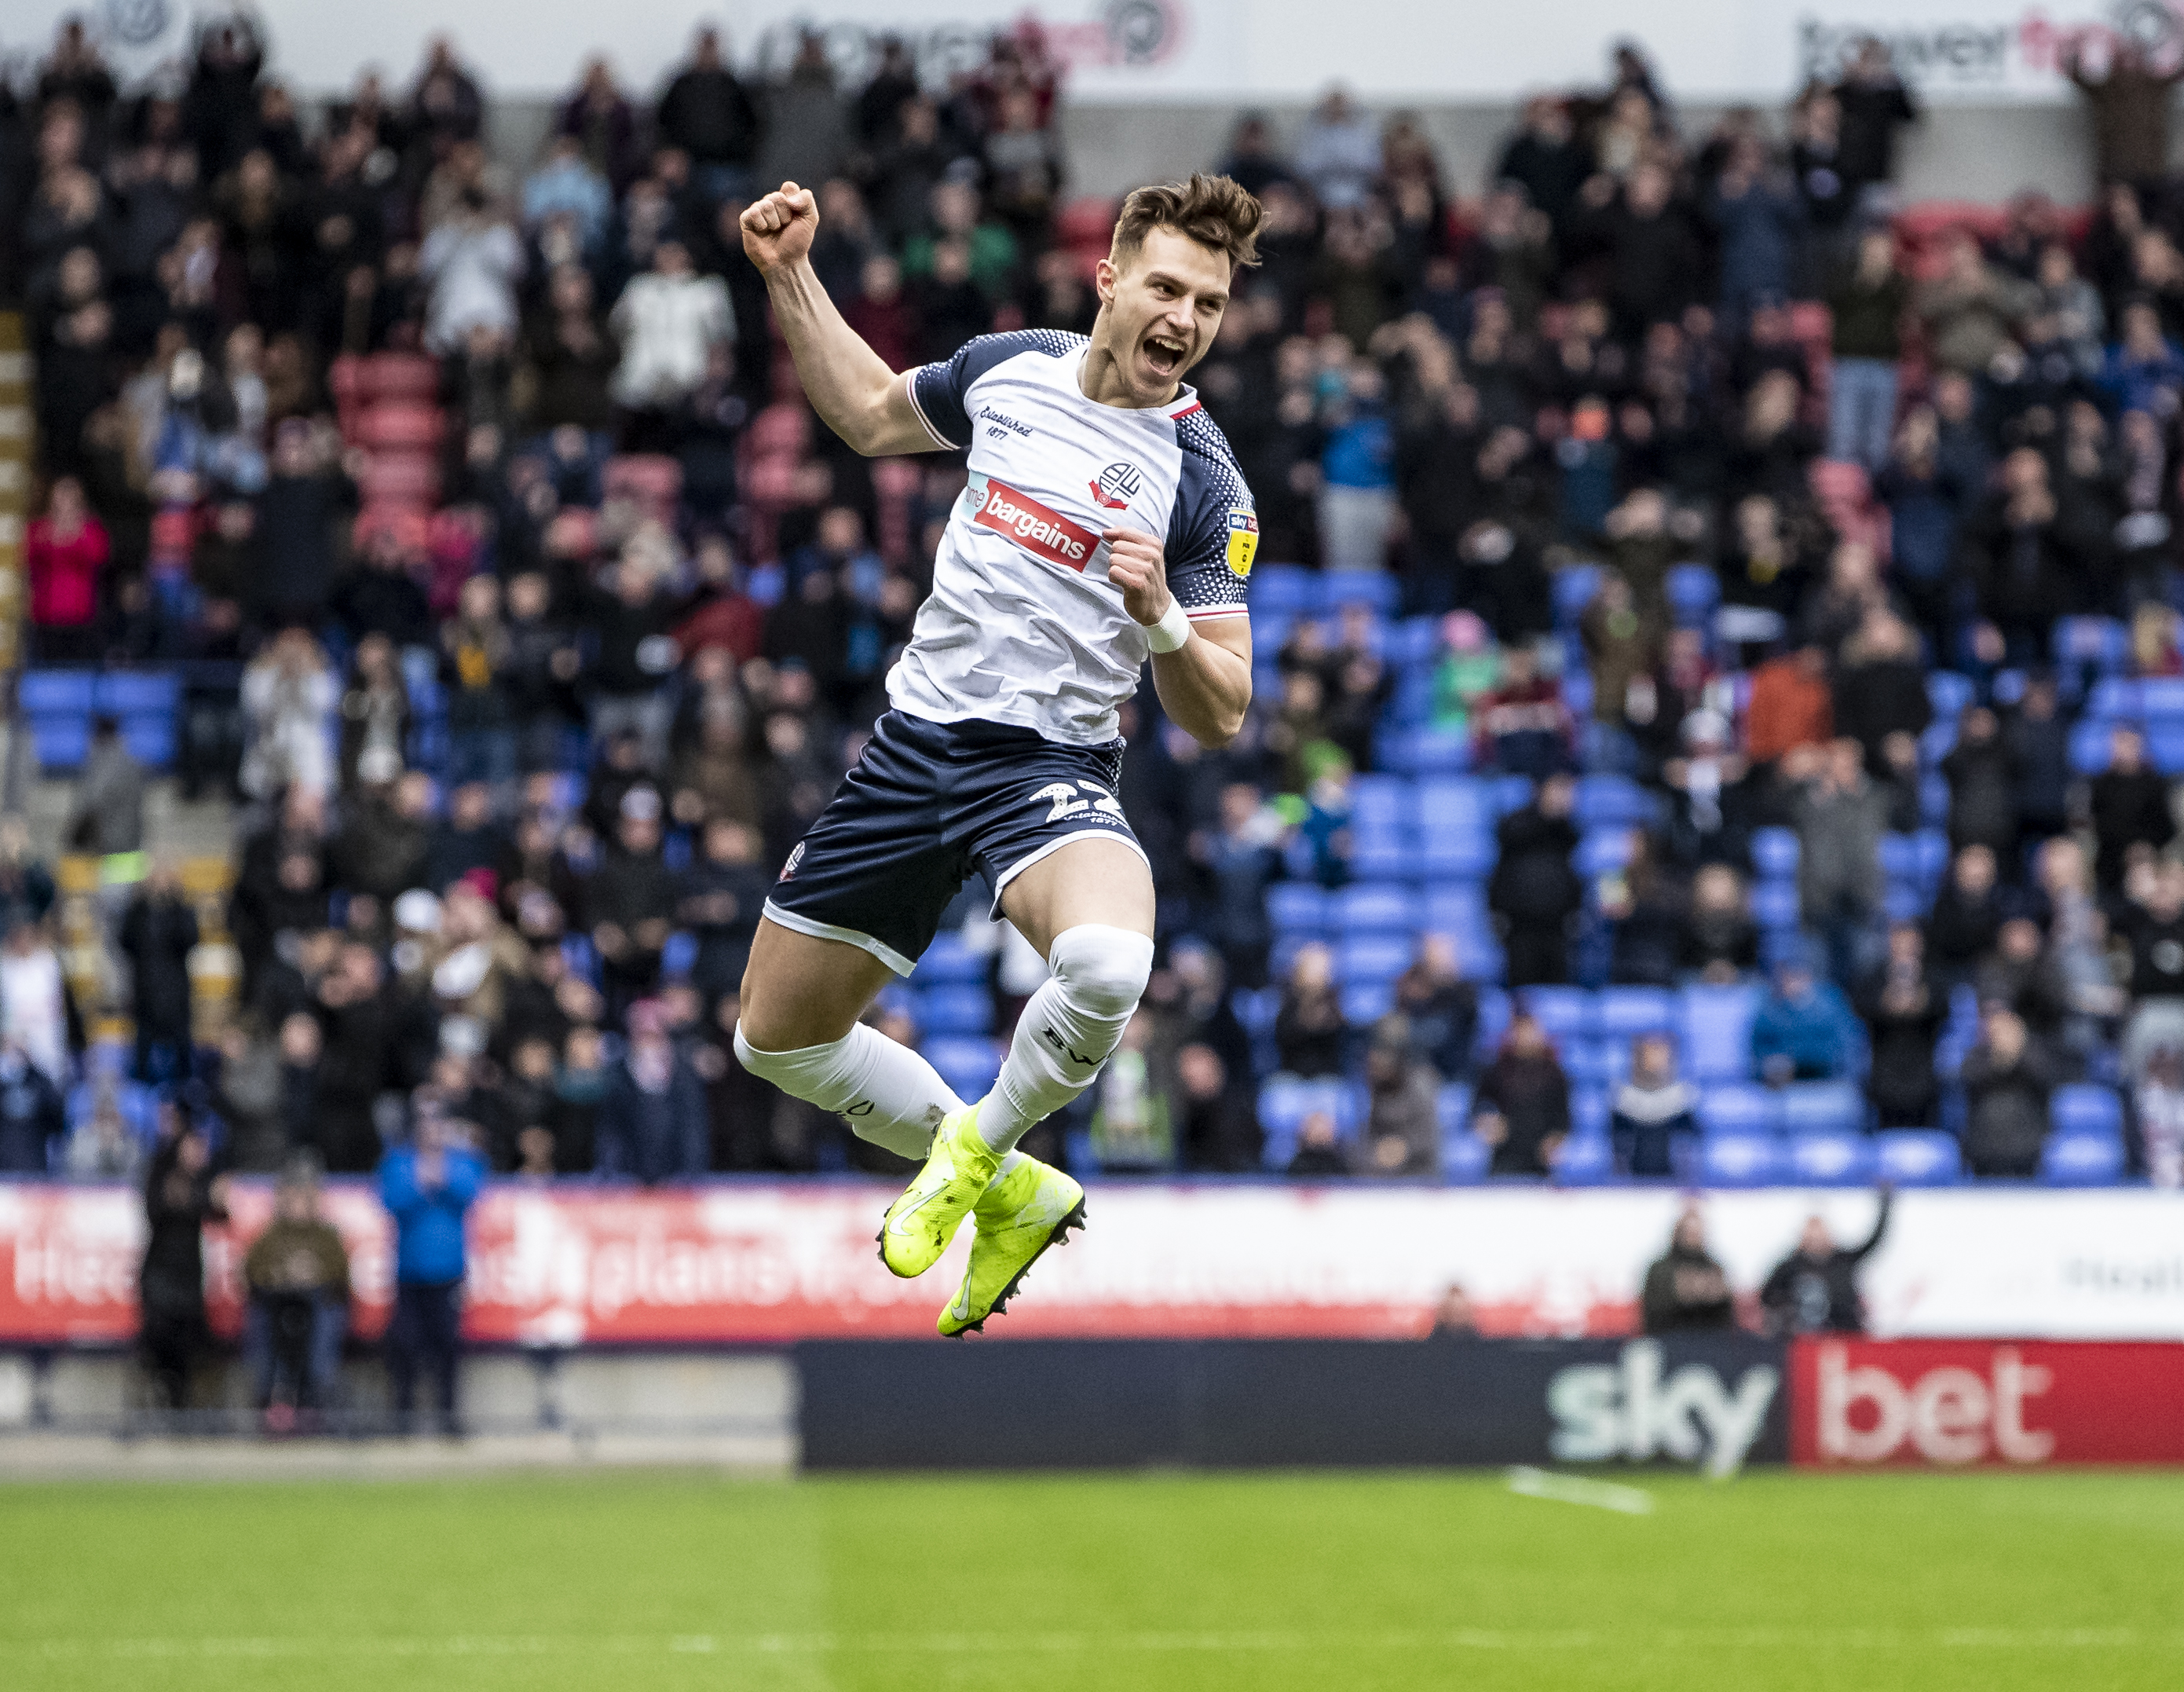 Bolton Wanderers v Tranmere Rovers - Sky Bet League One